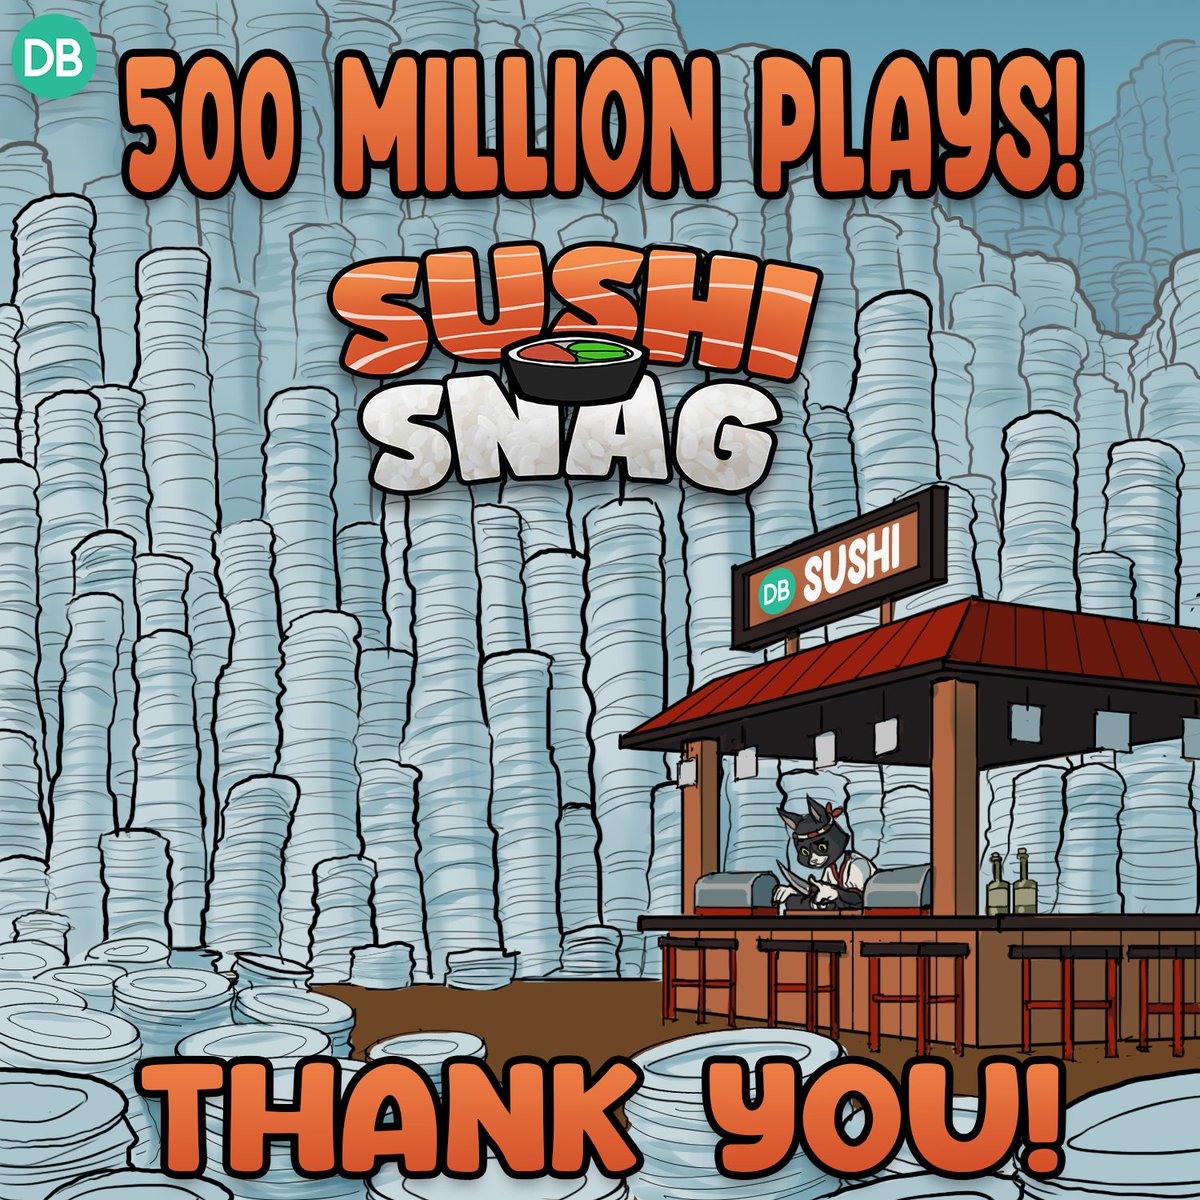 Super excited to share that our super goofy sushi-eating game for @SnapAR has now reached over HALF A BILLION plays! A number I never thought would be associated with any game we made. Learn more: dbcreations.studio/games/sushi-sn…